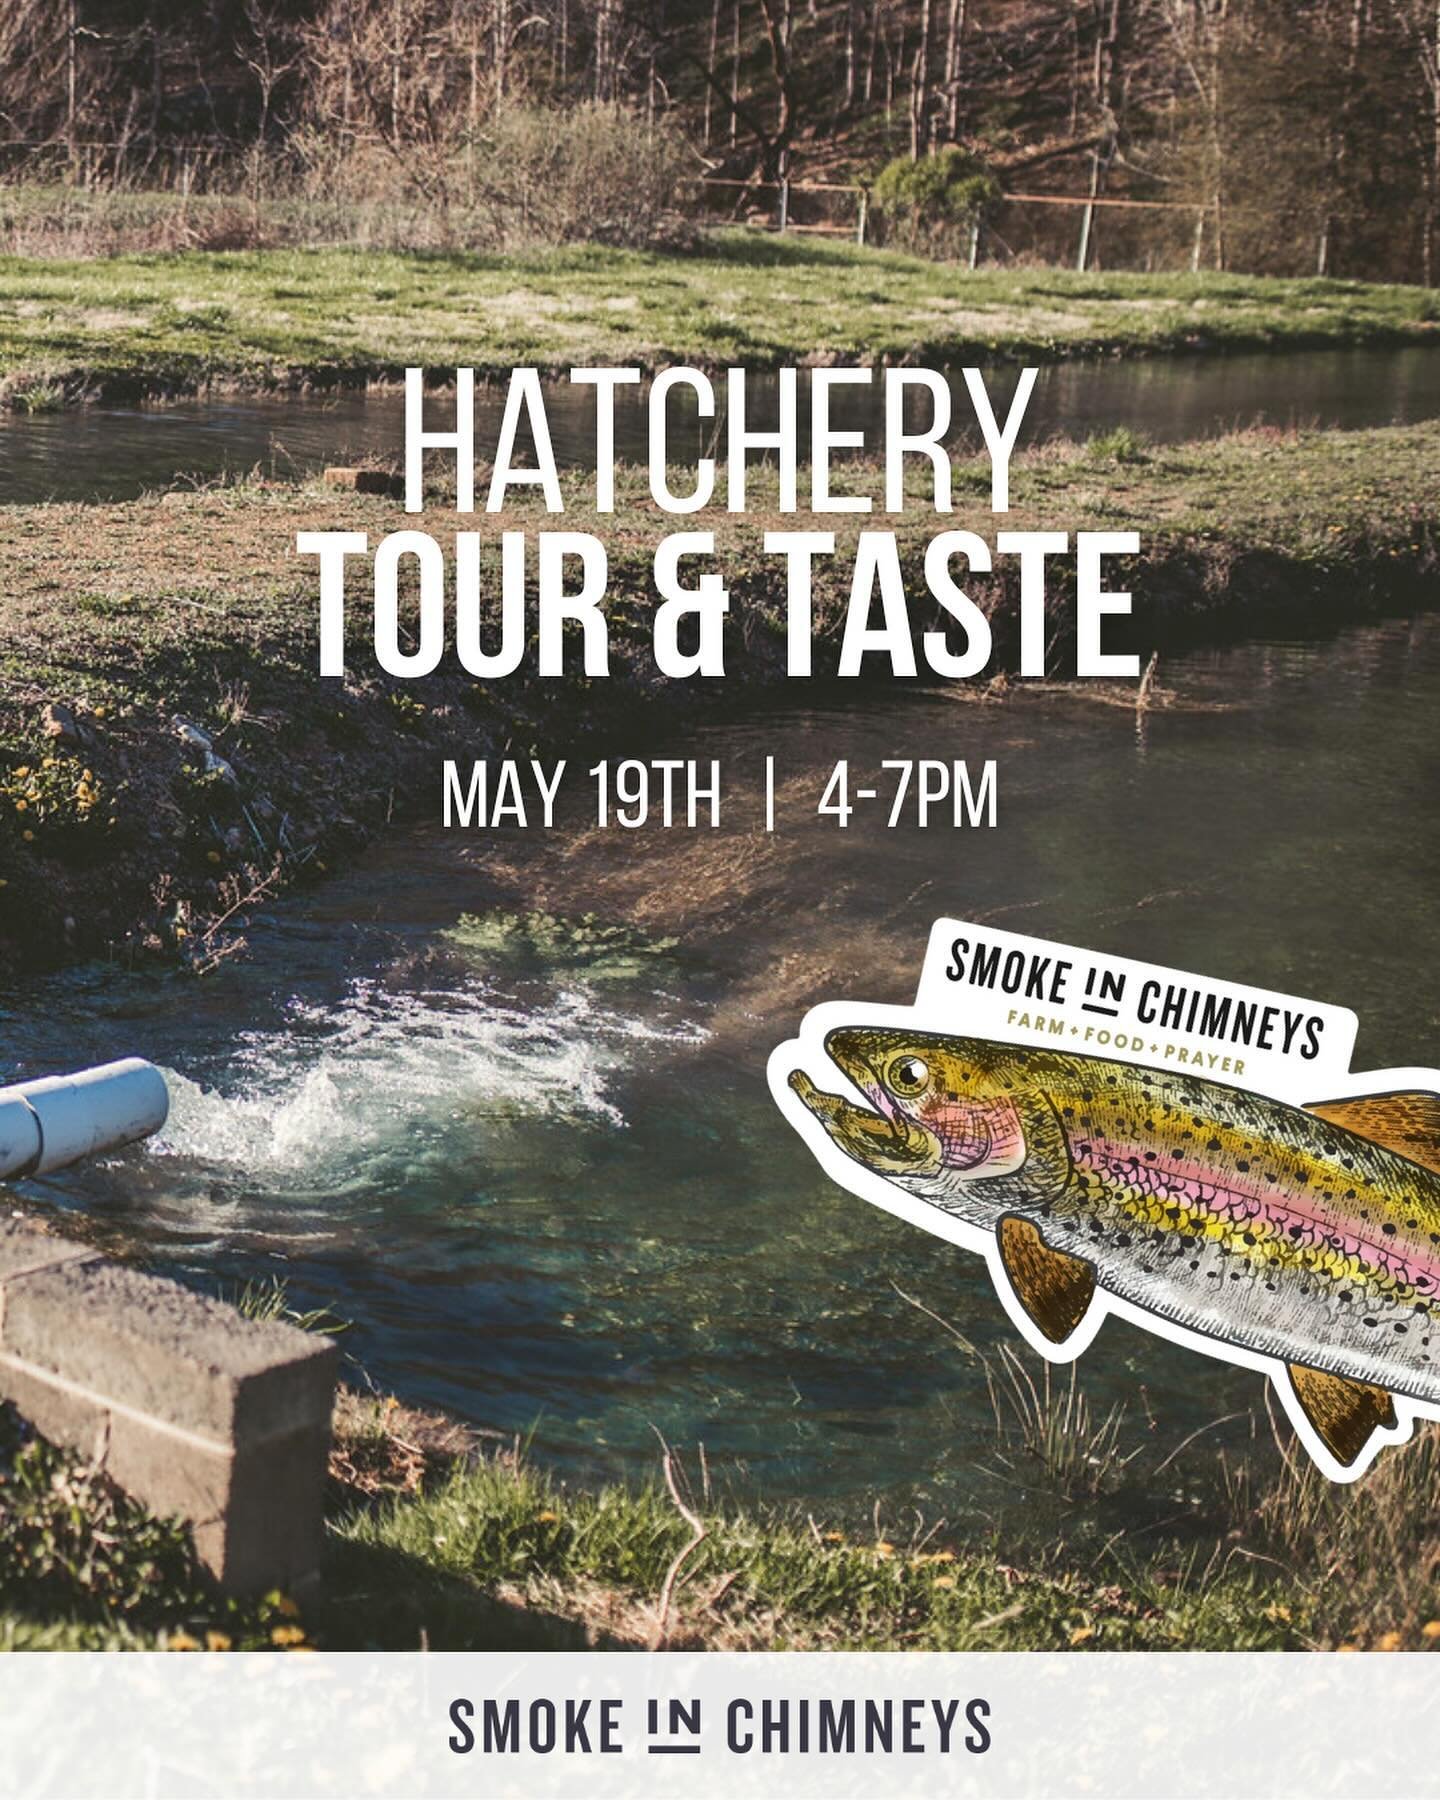 The Hatchery Tour and Taste was born out of our love for inviting people to our home. 🏡🌿

When we first came to New Castle, we hosted a &ldquo;fish fry&rdquo; which was really our grilled trout and everyone brought a side they loved. 🤍

We love to